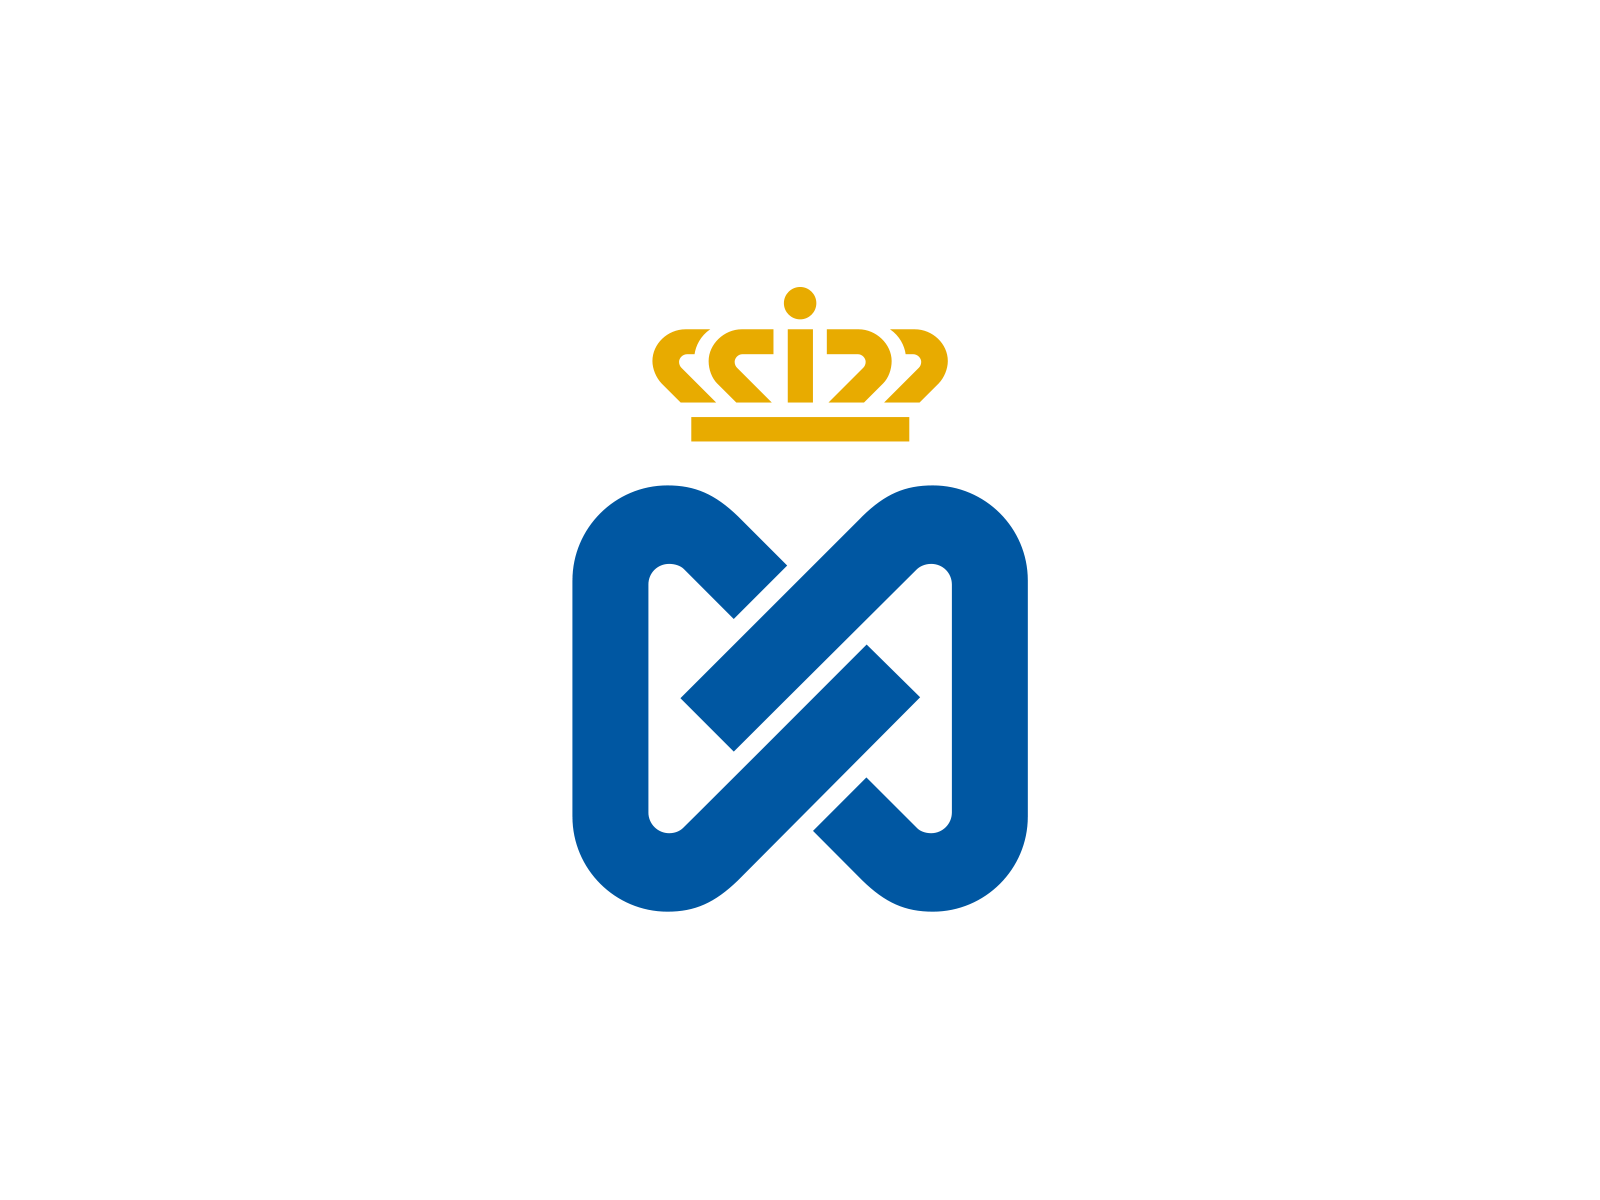 Blue and yellow logo brand